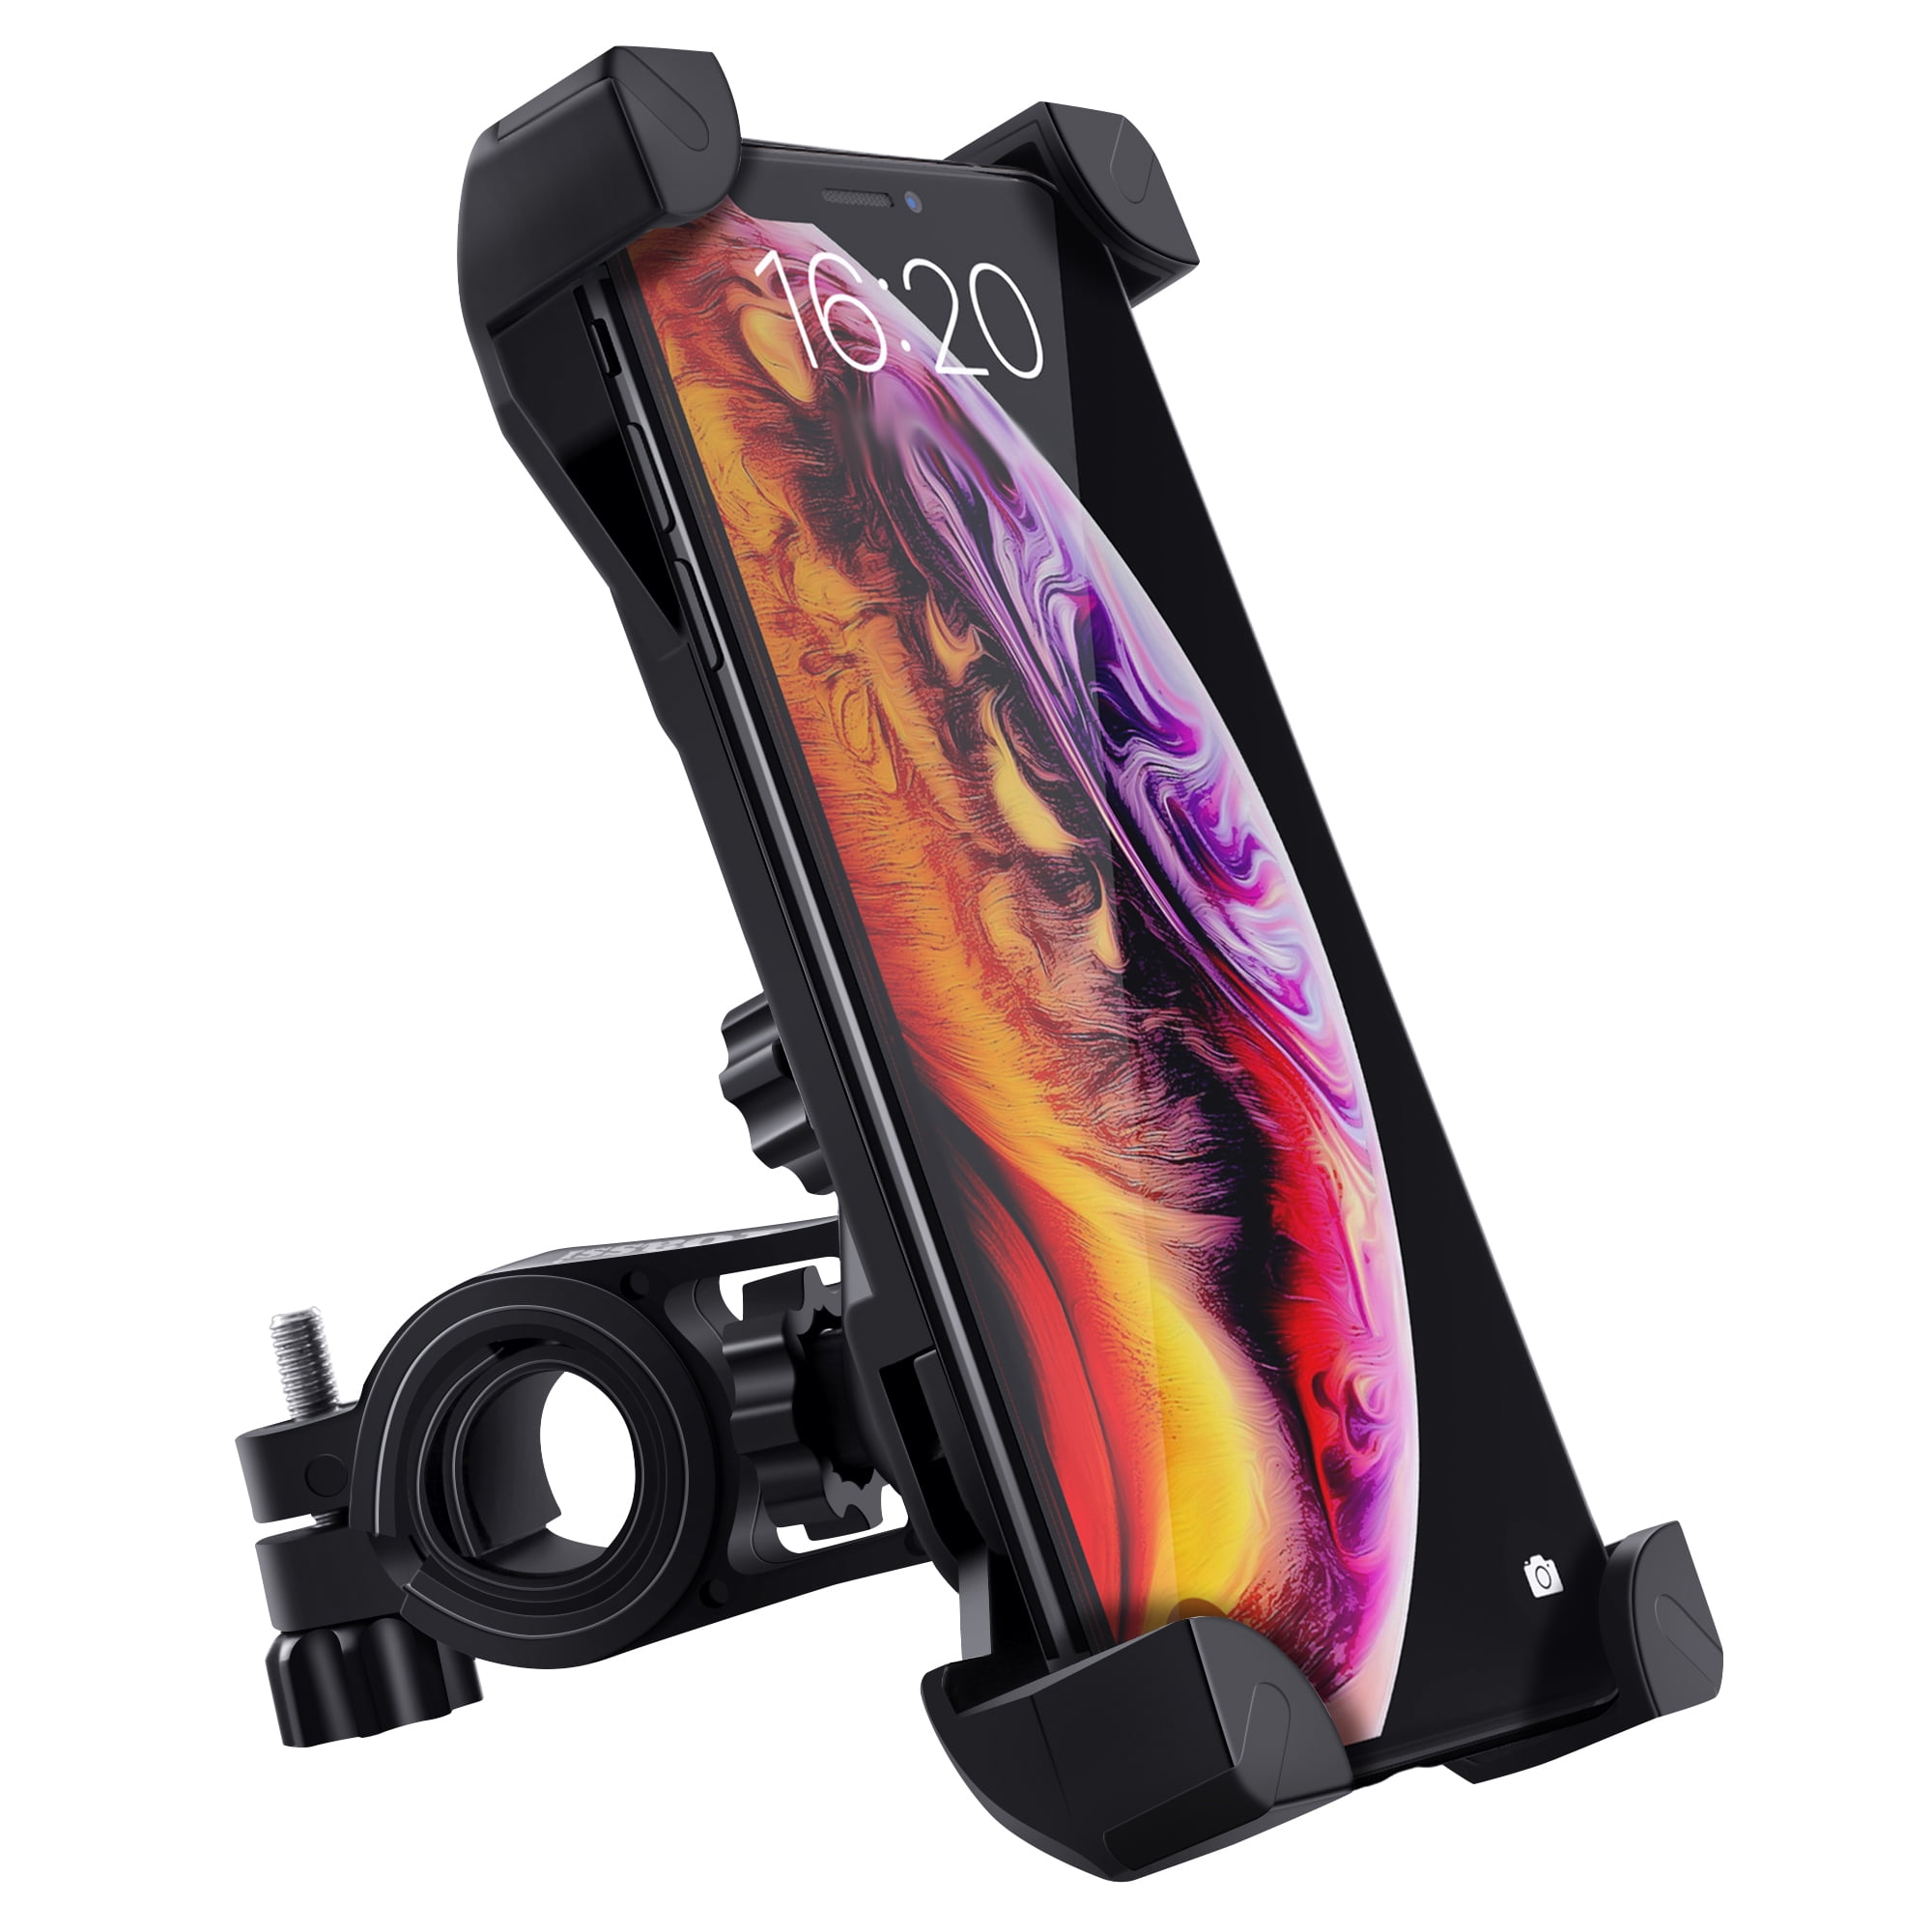 Bike Phone Holder Universal for iPhone X 8 7 6S Samsung Galaxy S9 S8 Cell Phone Mount for Bicycle Up to 7 inch Smartphones Anti-Shake and Non-slip 360 °Rotatable Silicone Smartphone Mount 